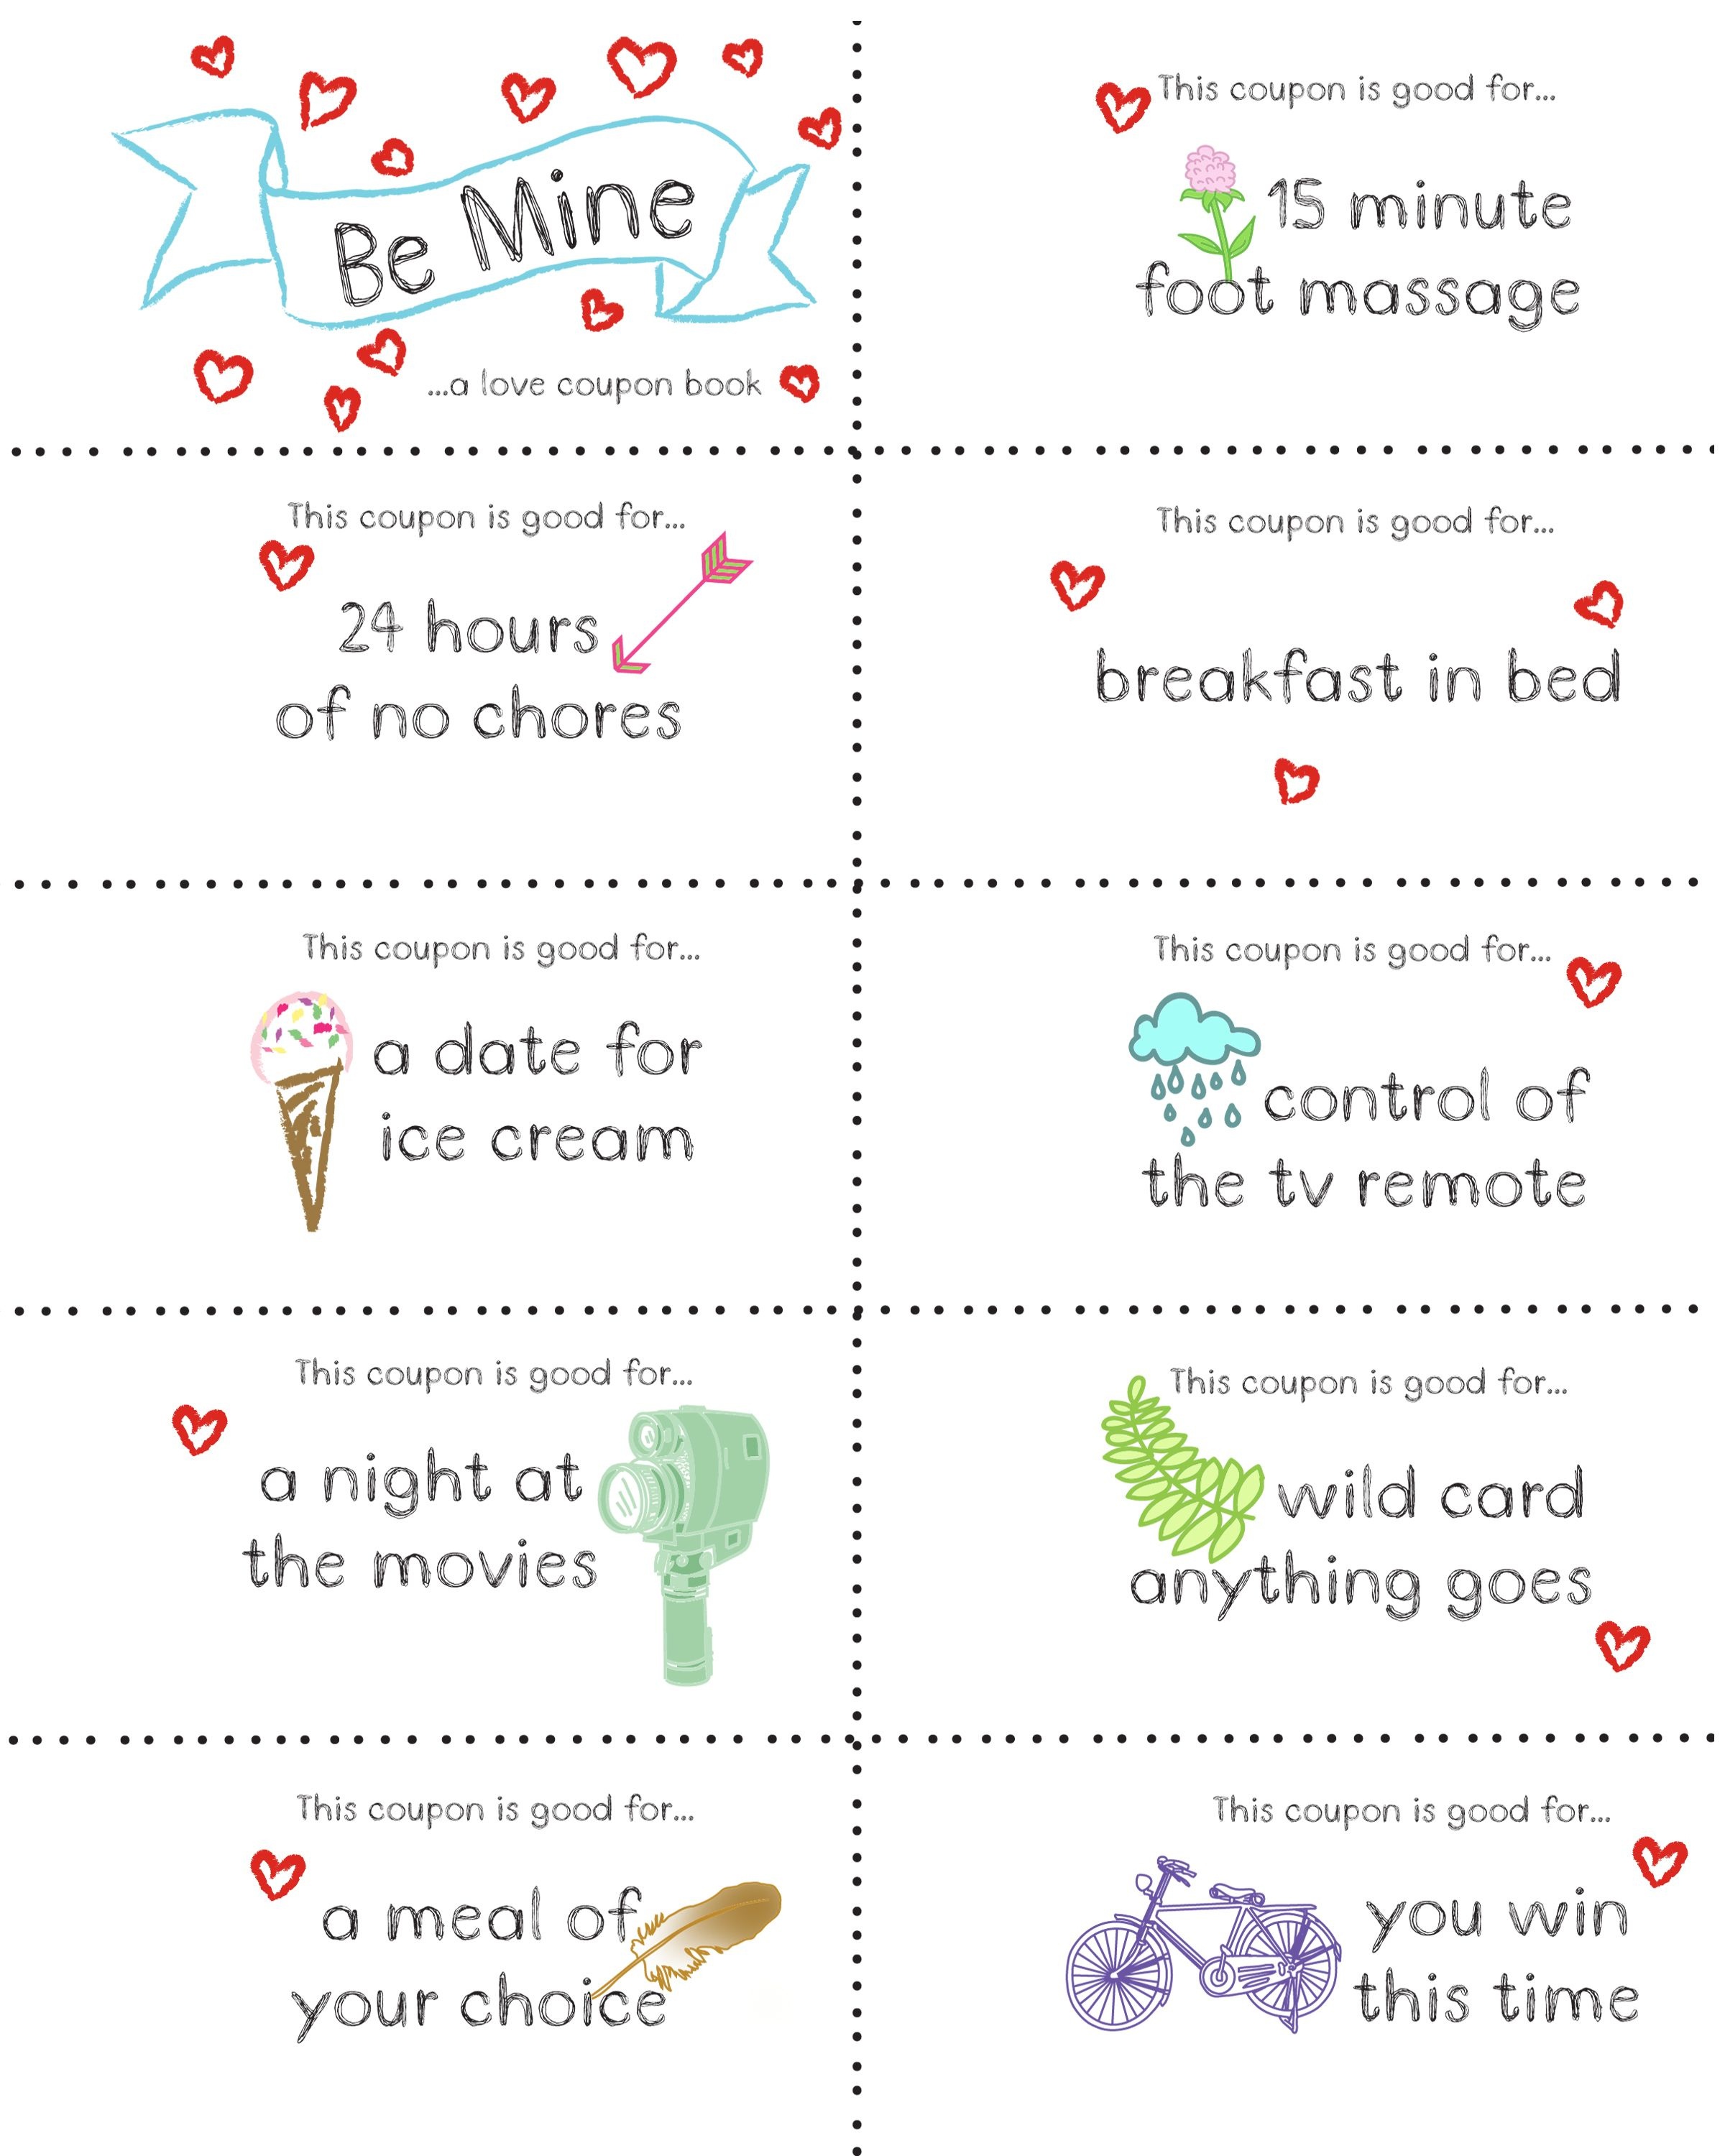 Last Minute Valentine Free Coupon Book Printable | Seasonal | Diy - Free Printable Coupon Book For Boyfriend